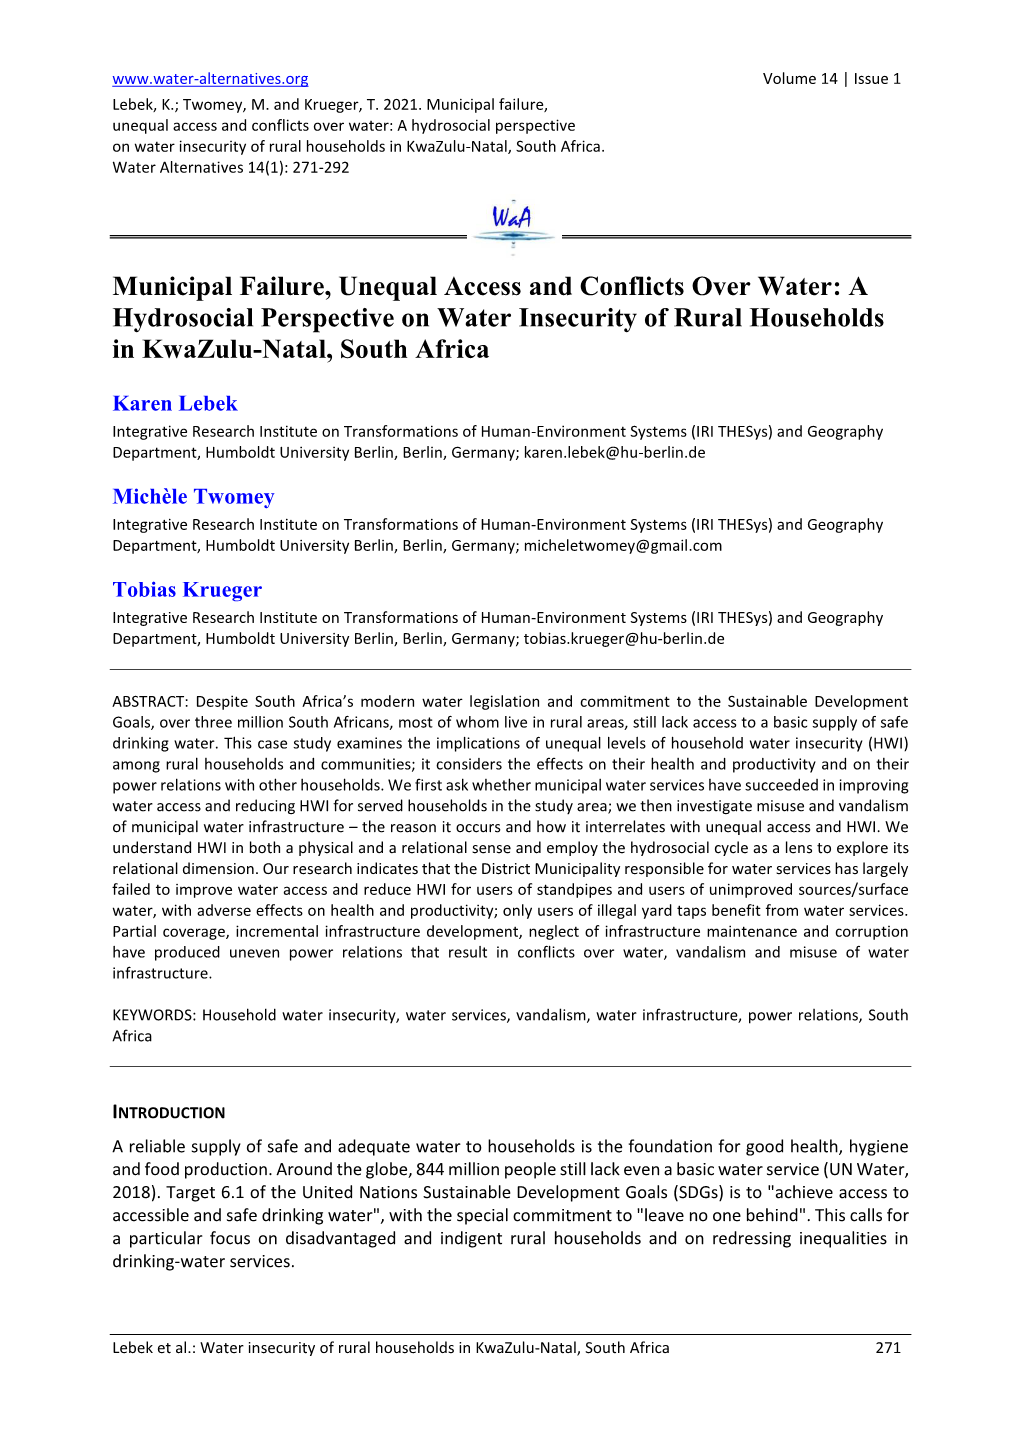 A Hydrosocial Perspective on Water Insecurity of Rural Households in Kwazulu-Natal, South Africa